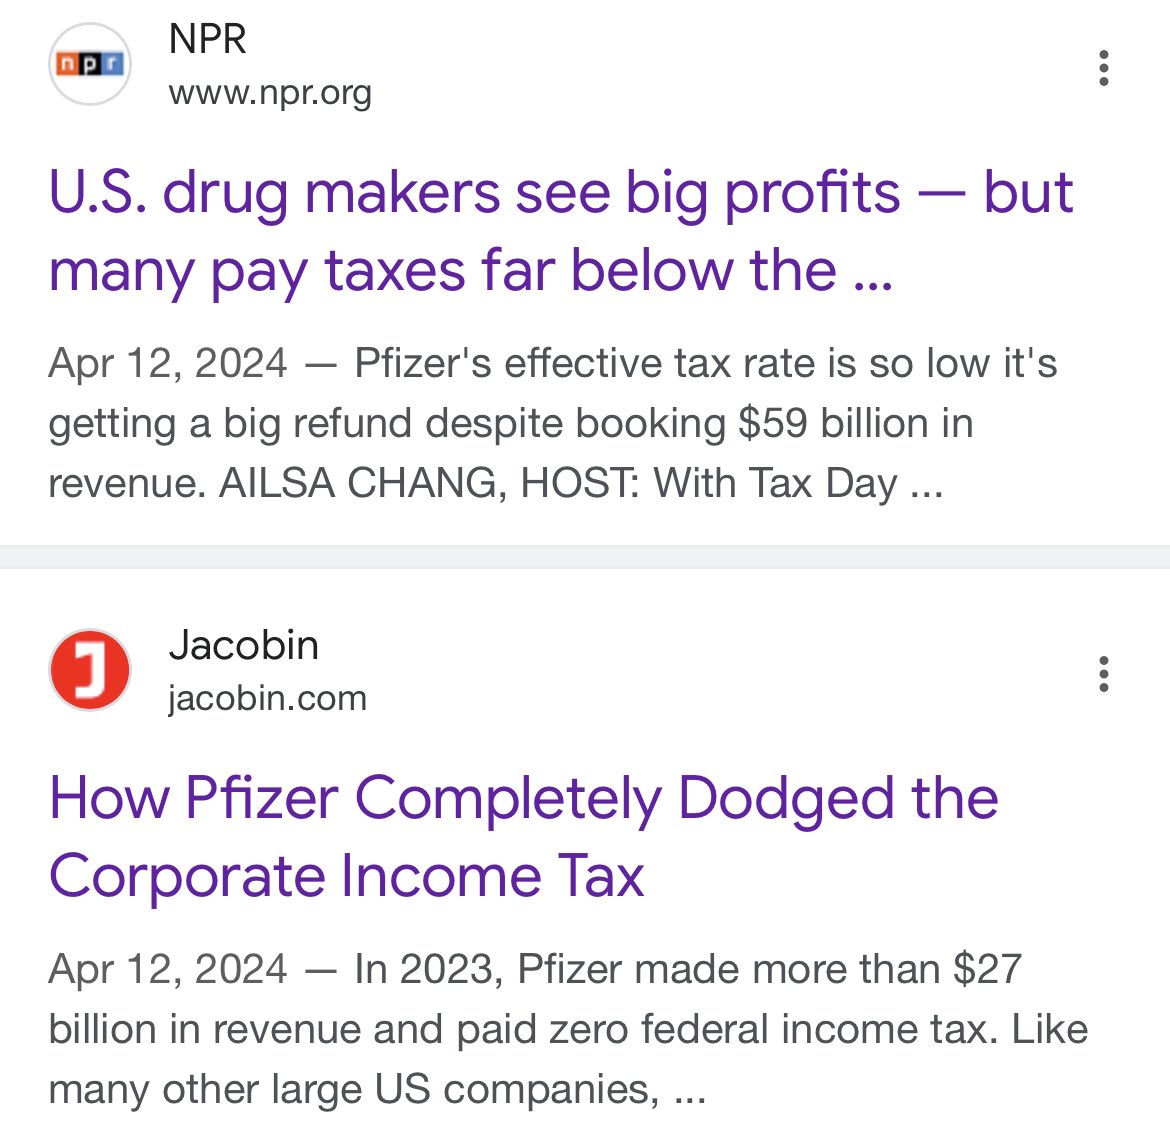 Pfizer gets the government to buy its products & “mandate them on people, then gets a tax refund instead of paying taxes?